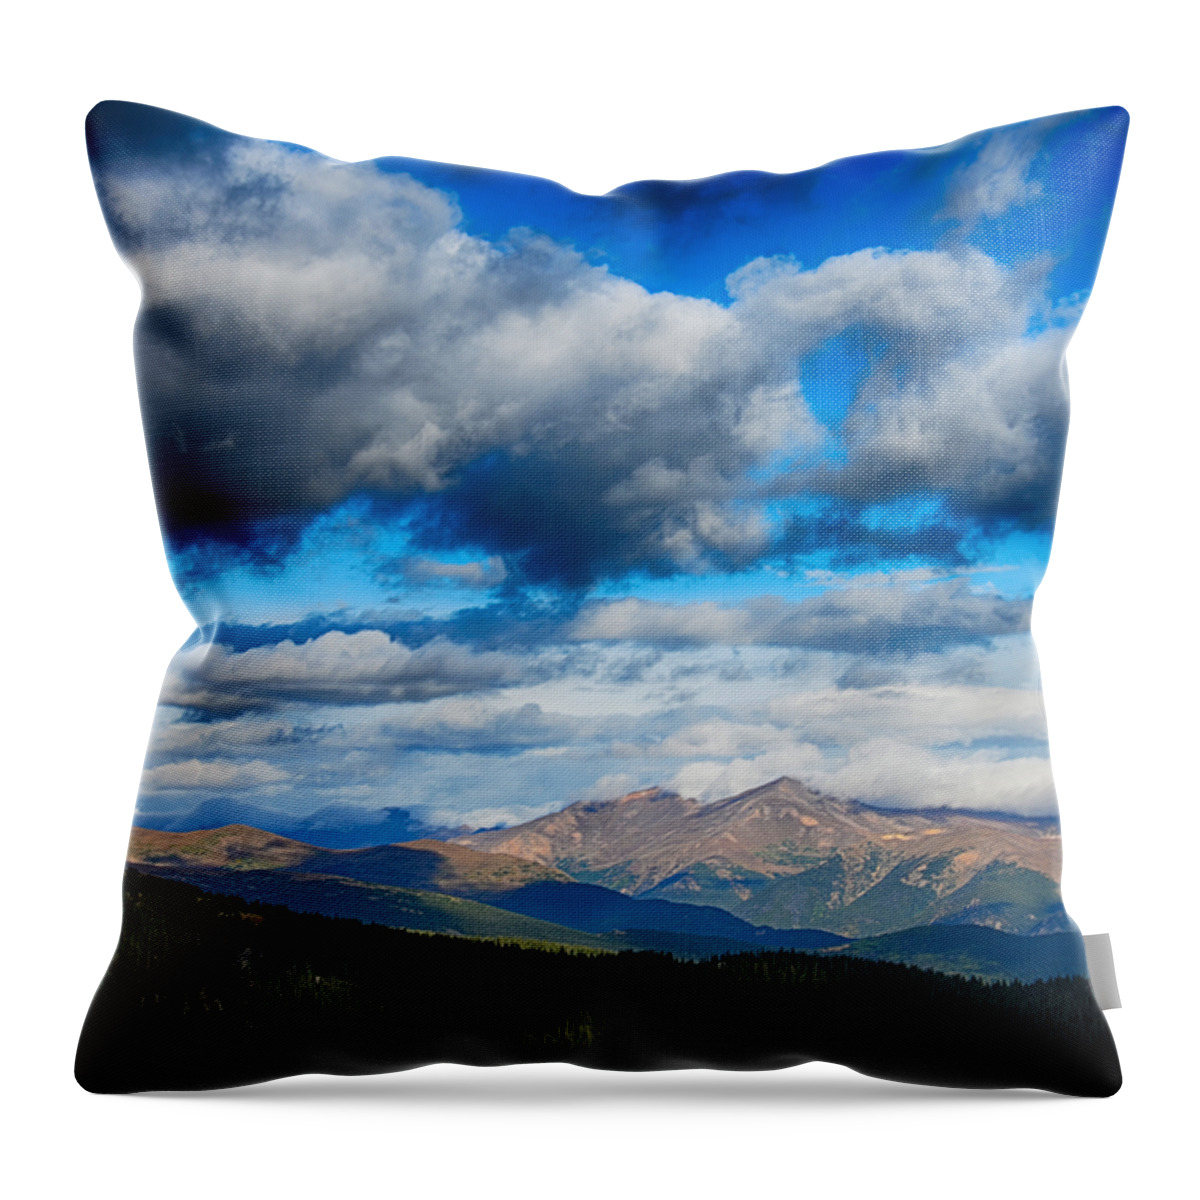 Mount Evans Throw Pillow featuring the photograph Layers Of Clouds On Mount Evans by Angelina Tamez